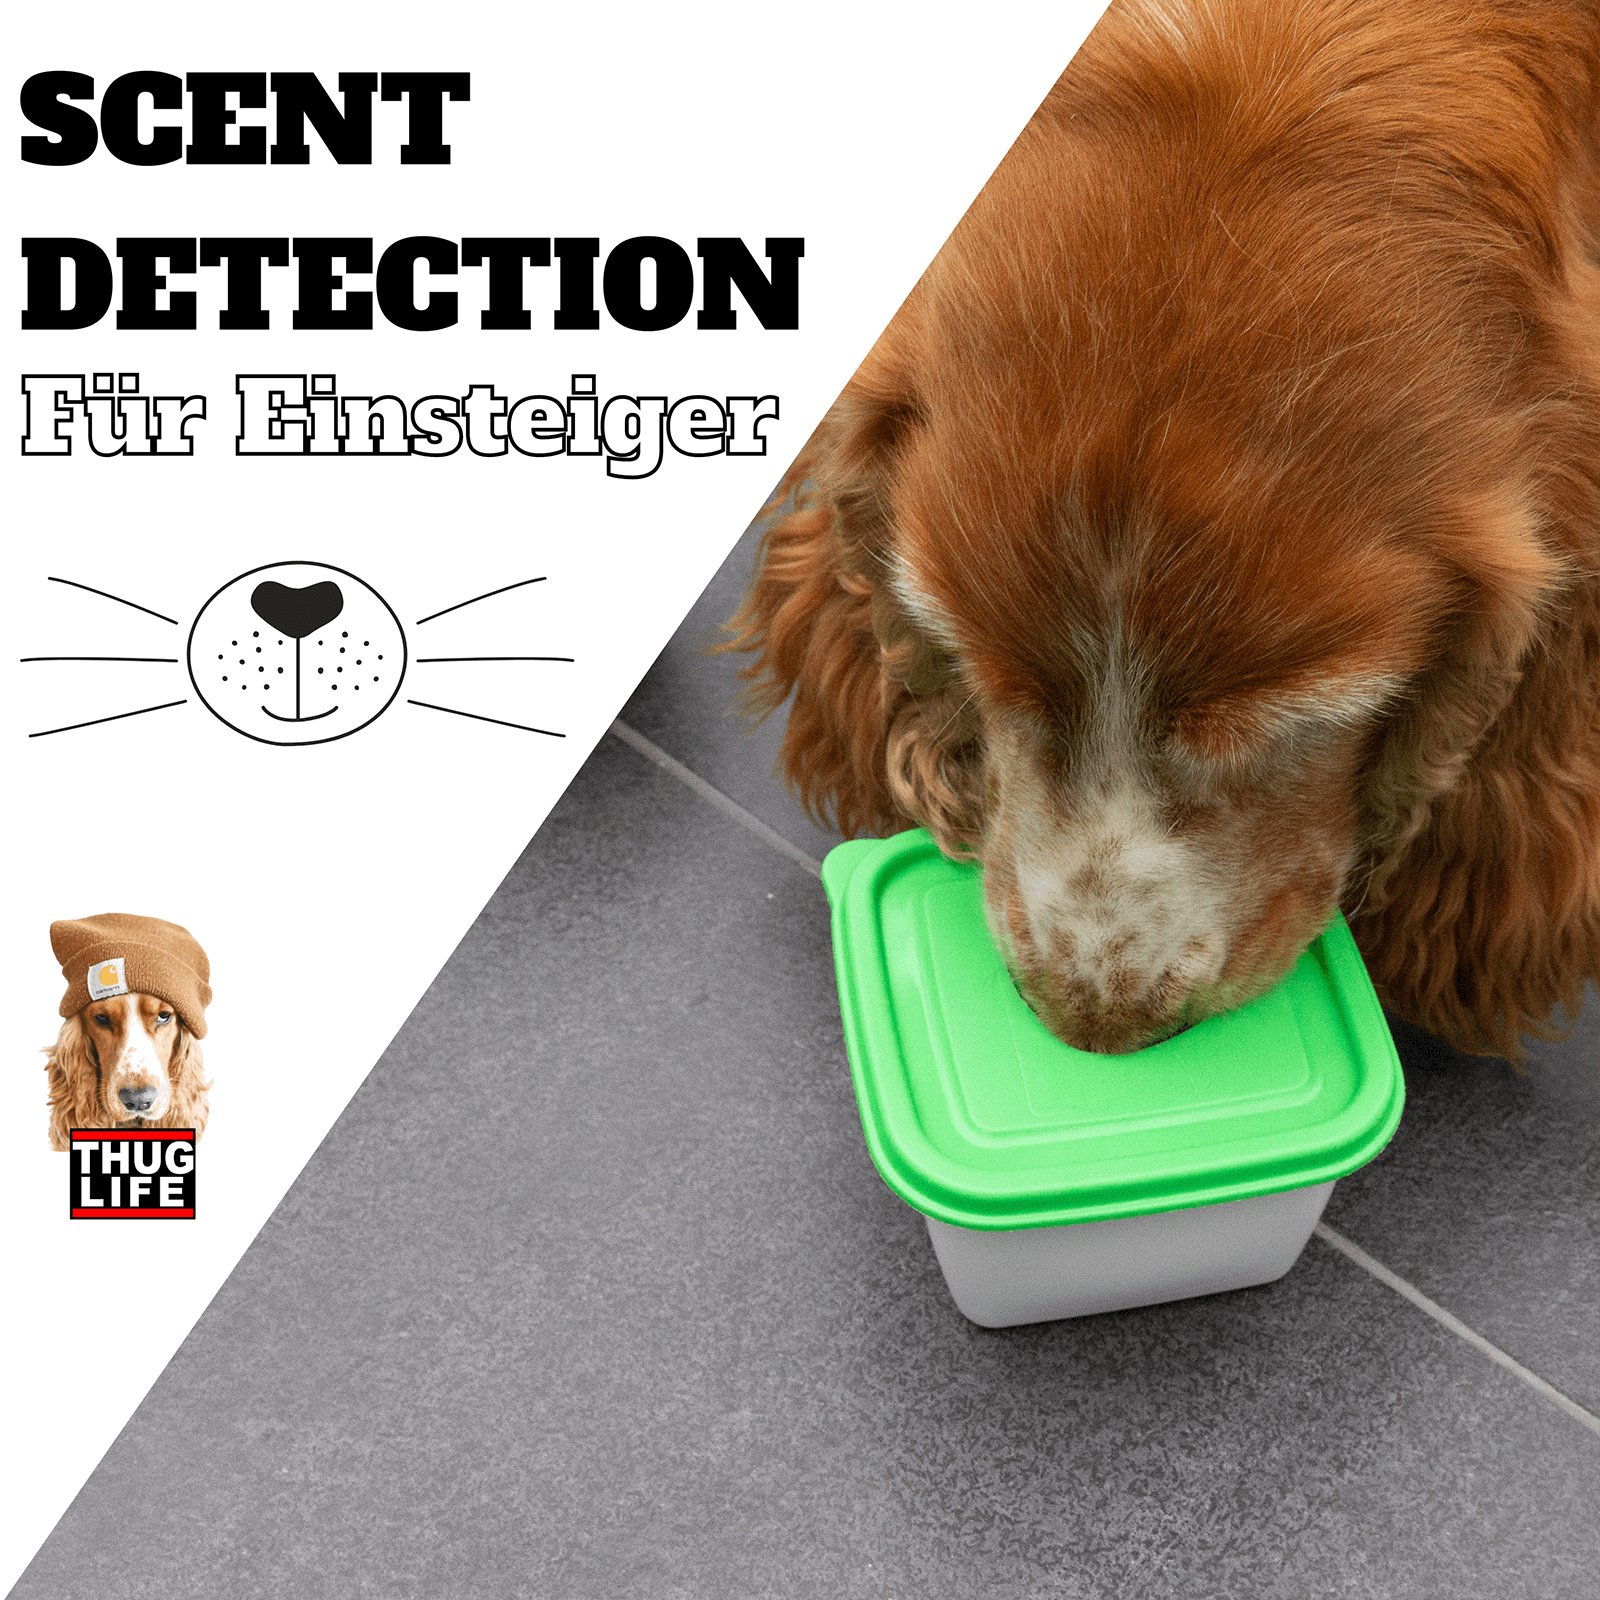 Vroni's Hundeschule: Scent Detection